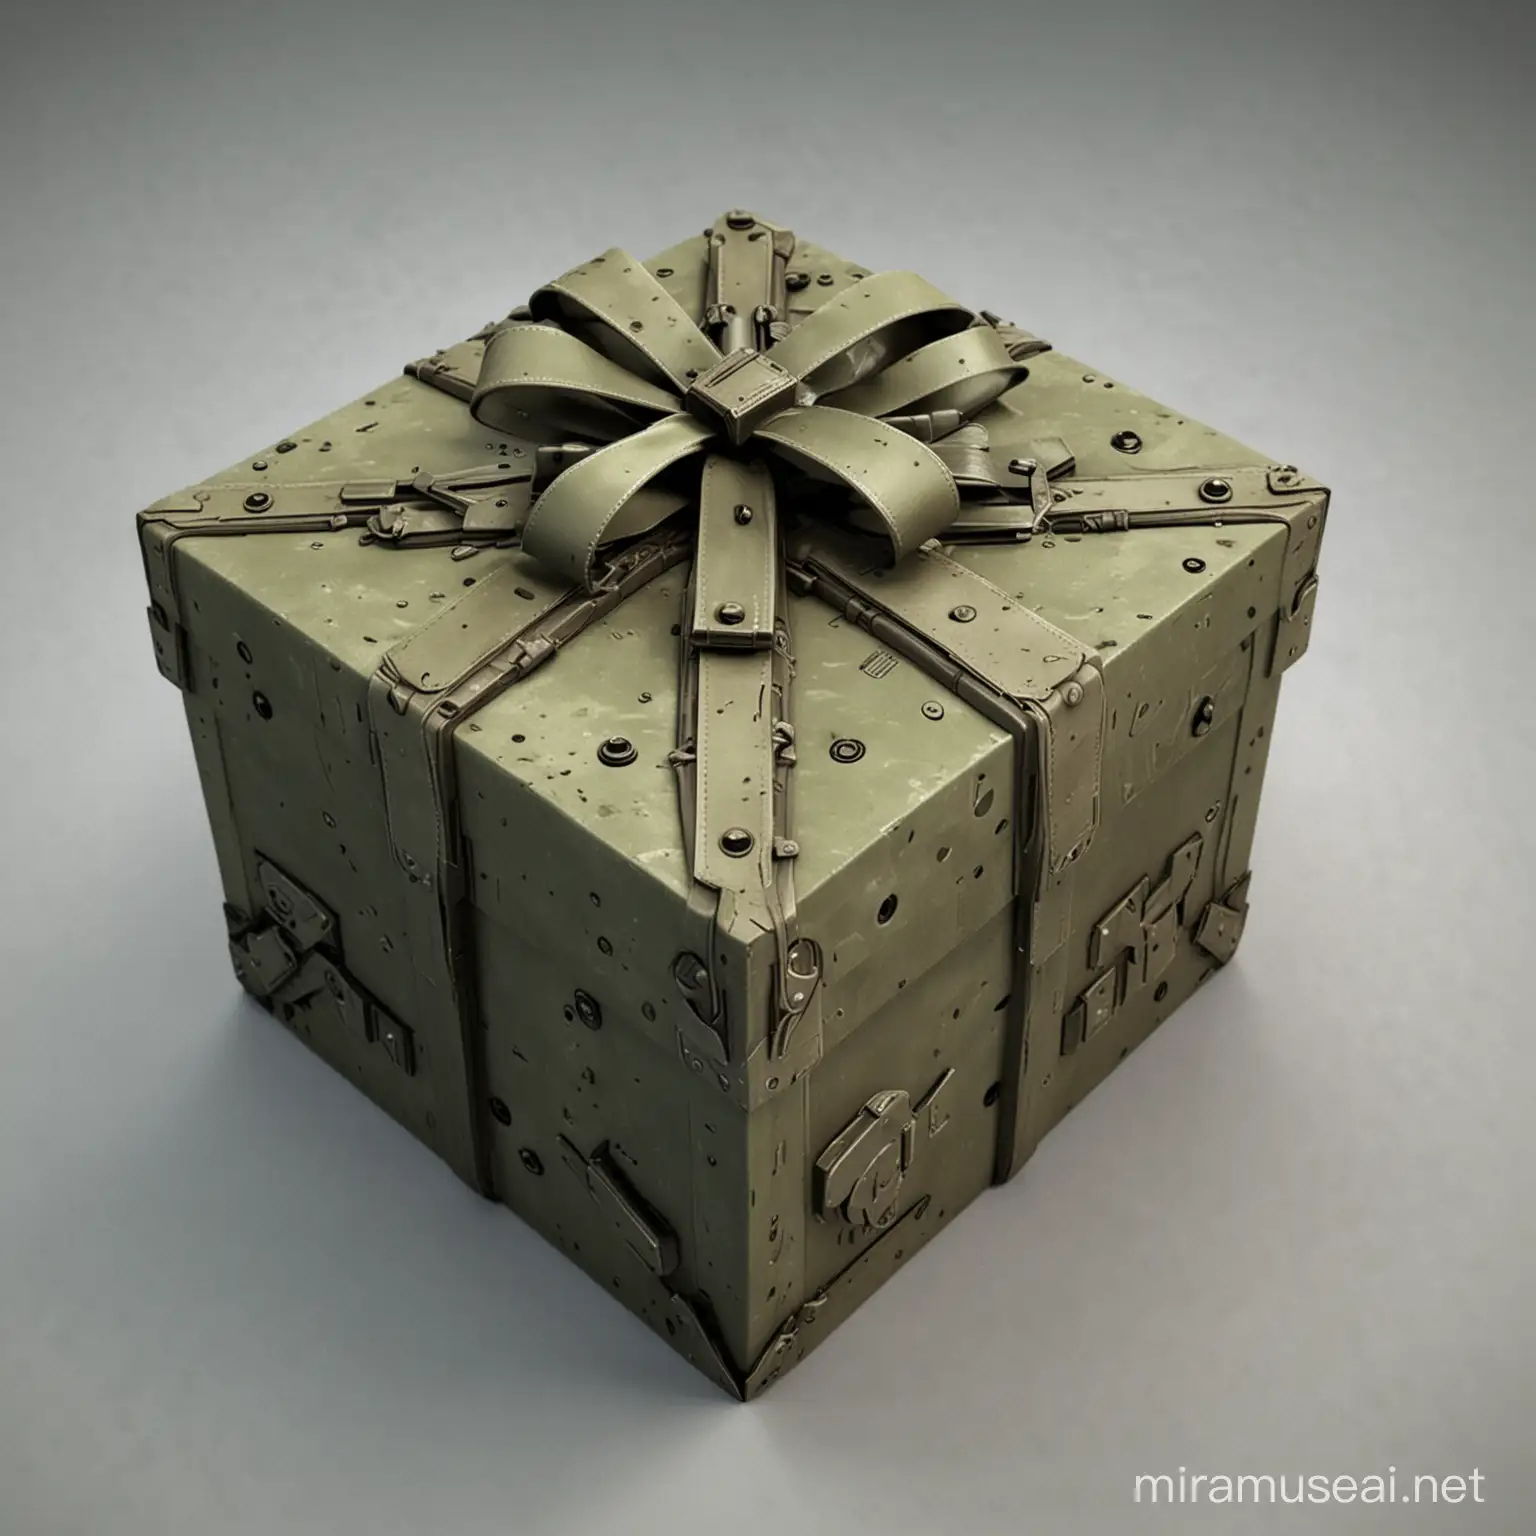 a 3D Gift box like Combat arms gift boxes style


